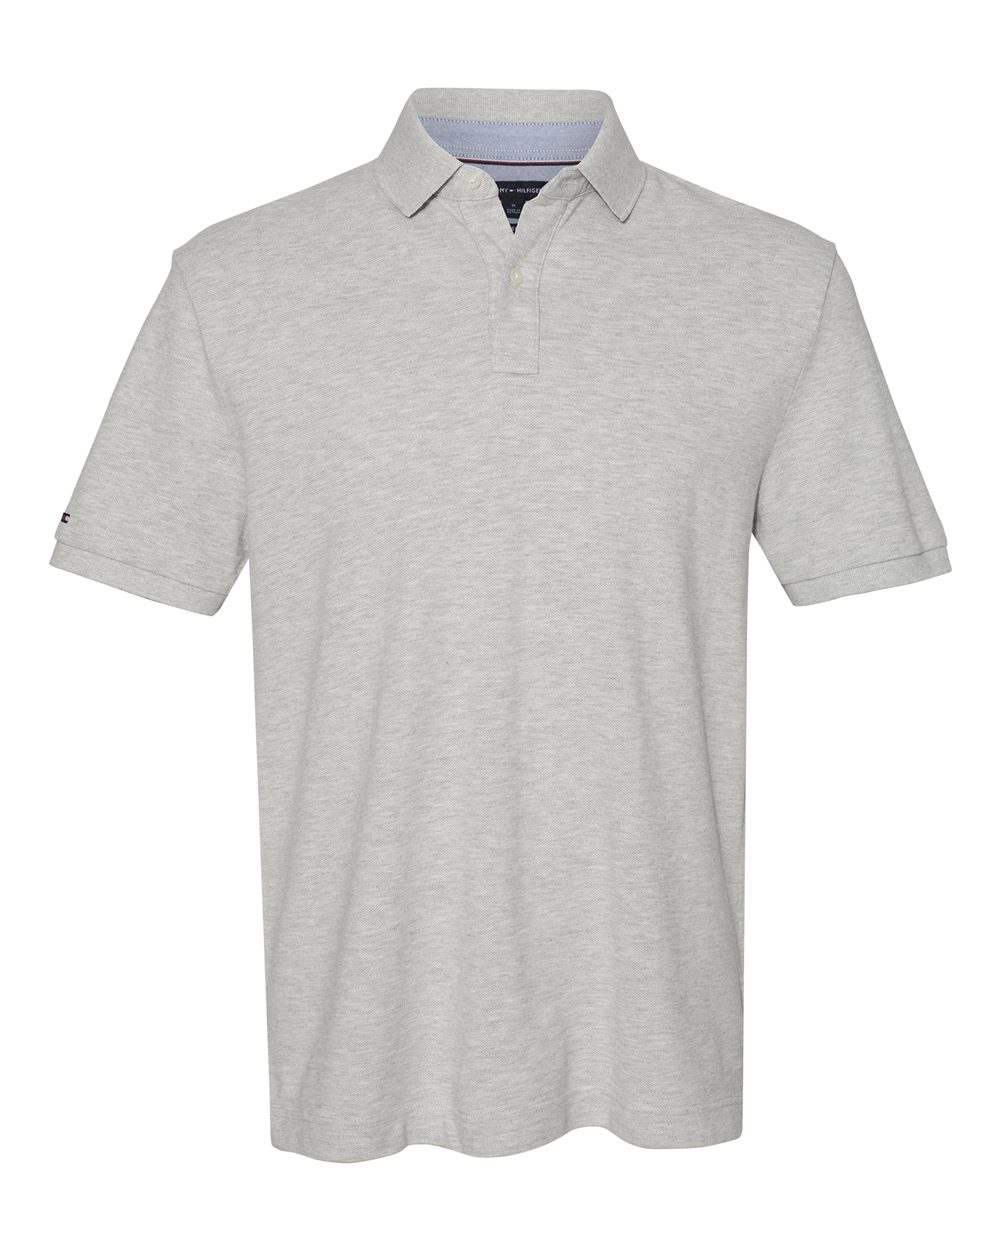 Tommy Hilfiger Classic Fit Ivy Pique Polo #13H1867 Light Grey Heather